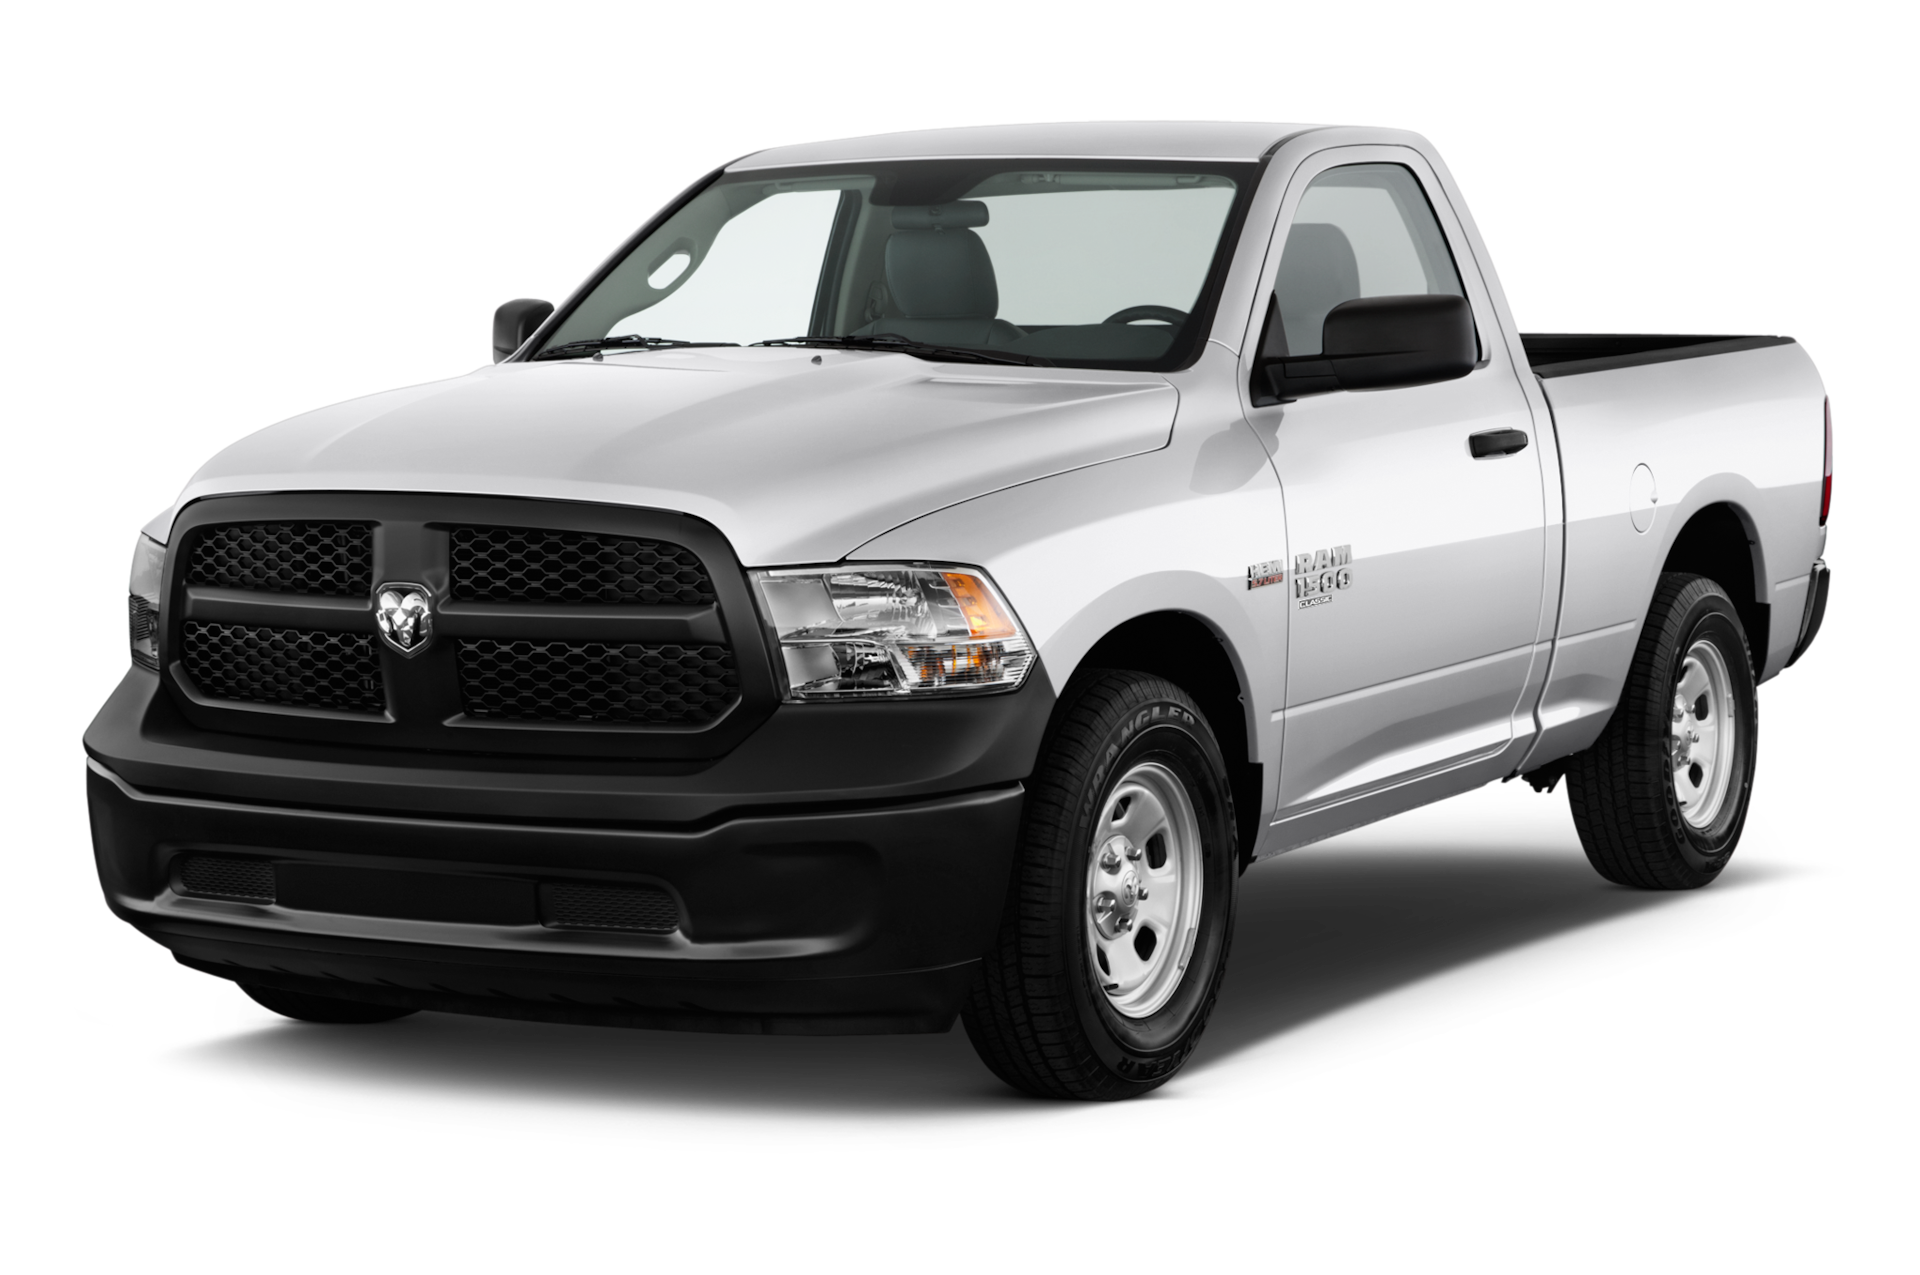 2019 Ram 1500 Prices, Reviews, and Photos - MotorTrend